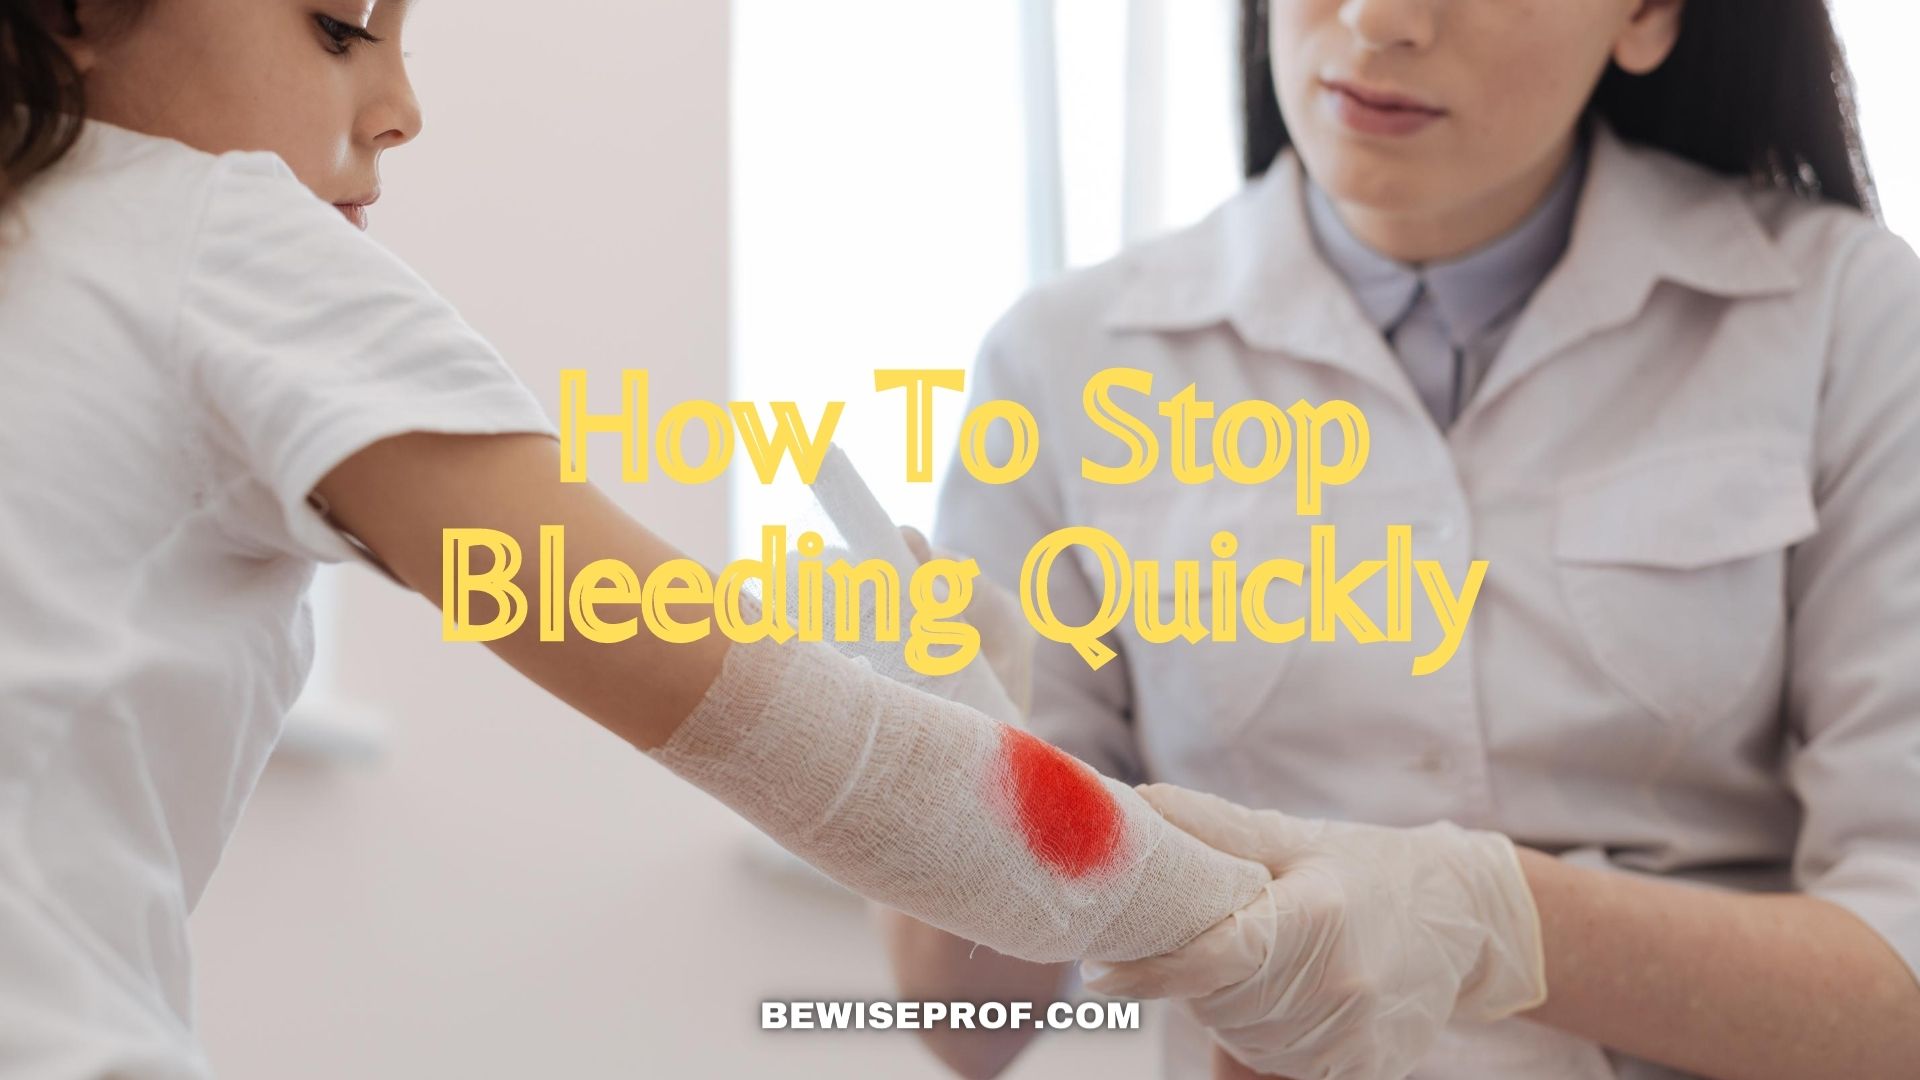 How To Stop Bleeding Quickly